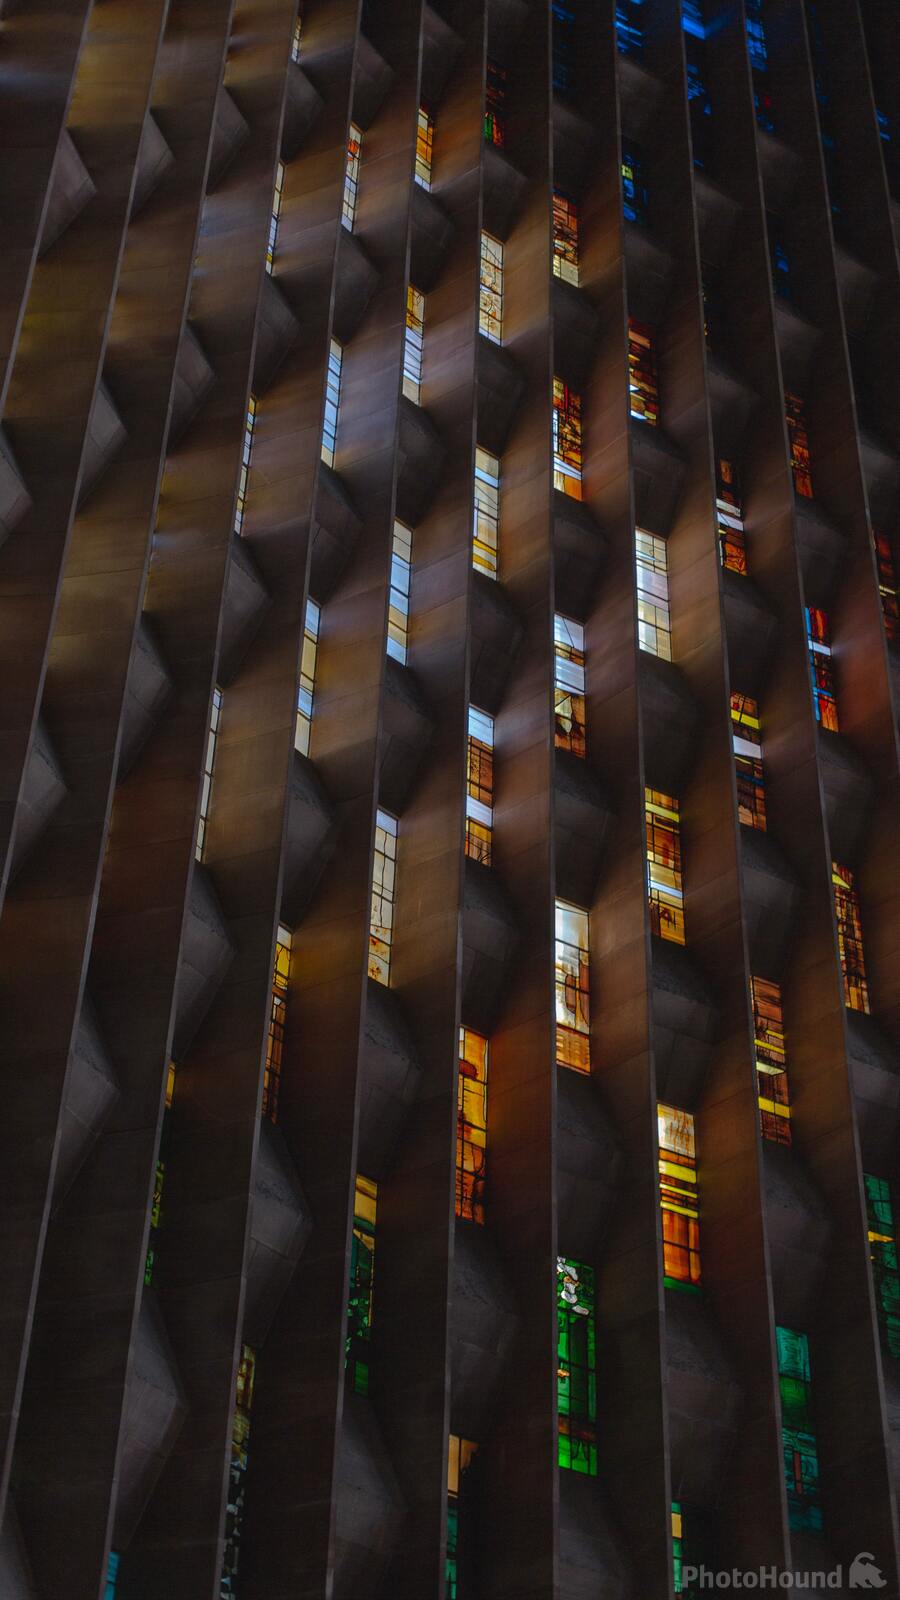 Image of Coventry Cathedral by Team PhotoHound